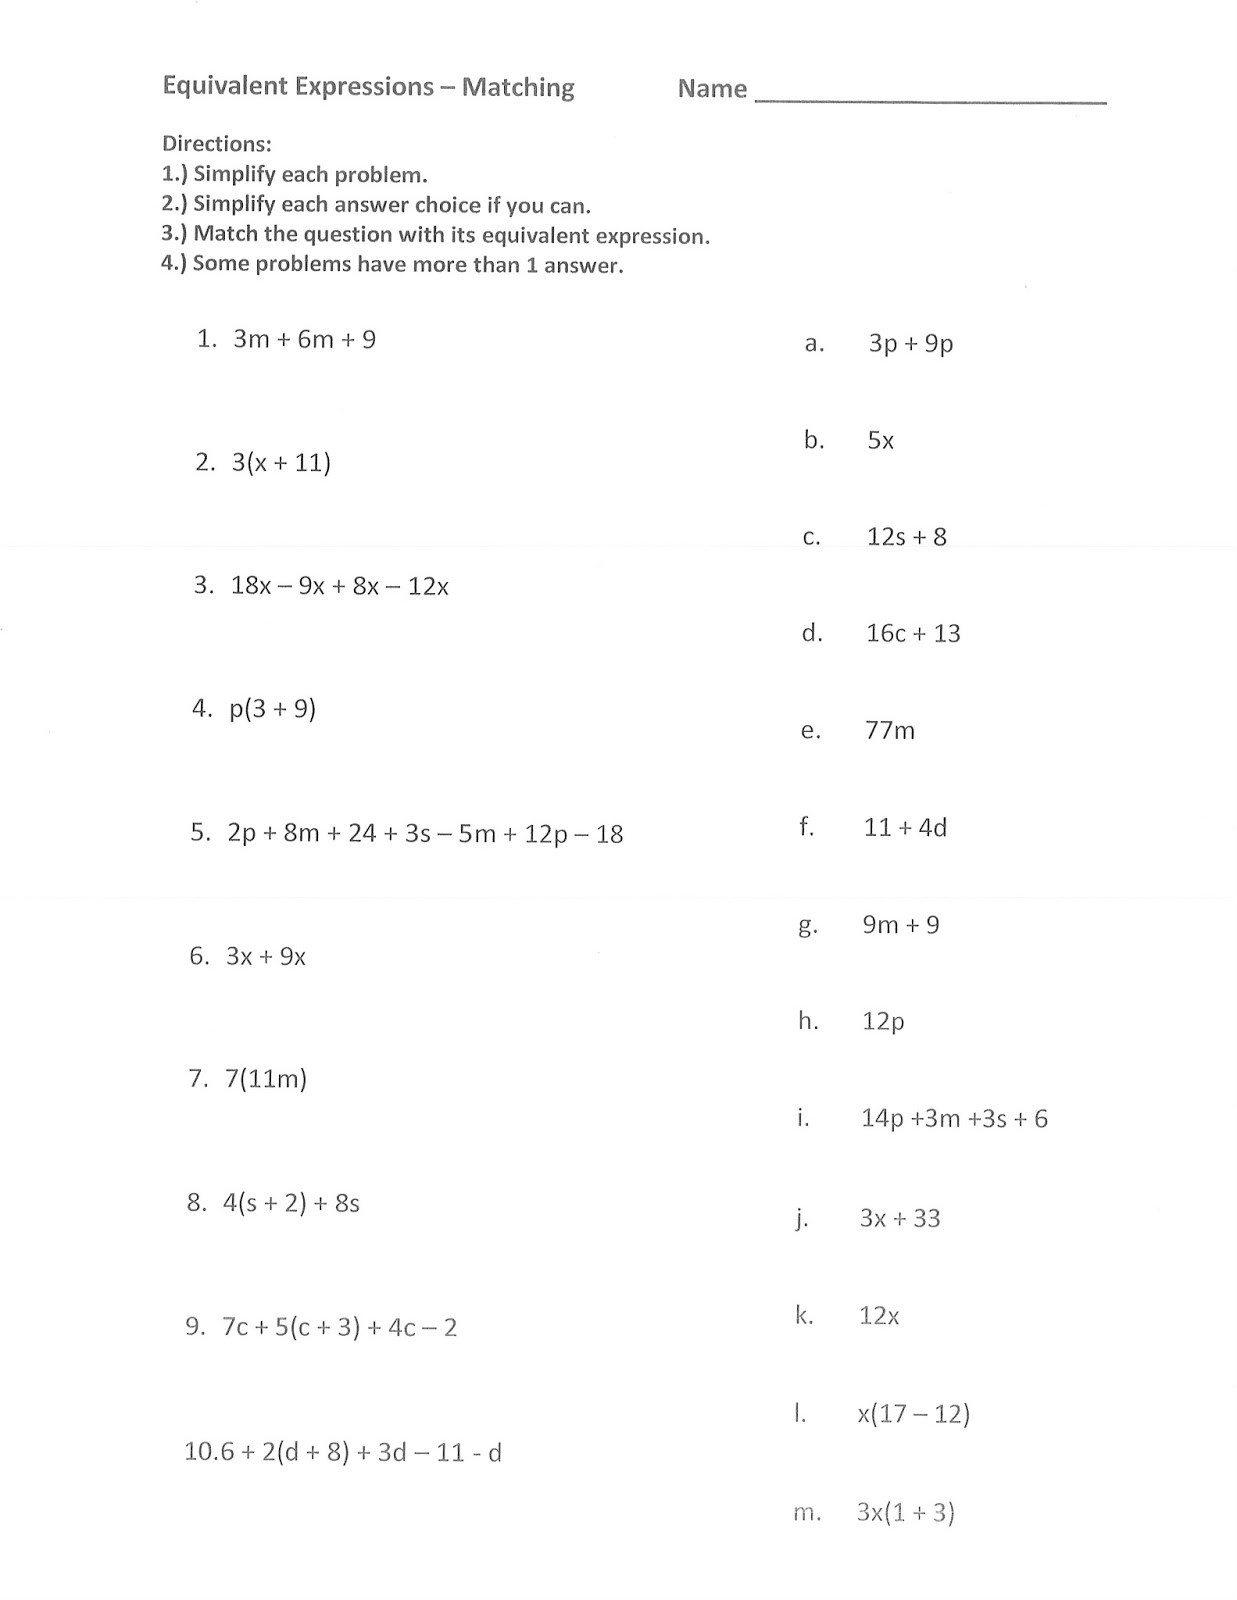 Equivalent Expressions Worksheet 6th Grade Equivalent Expressions Worksheet Rupsucks Printables Worksheets